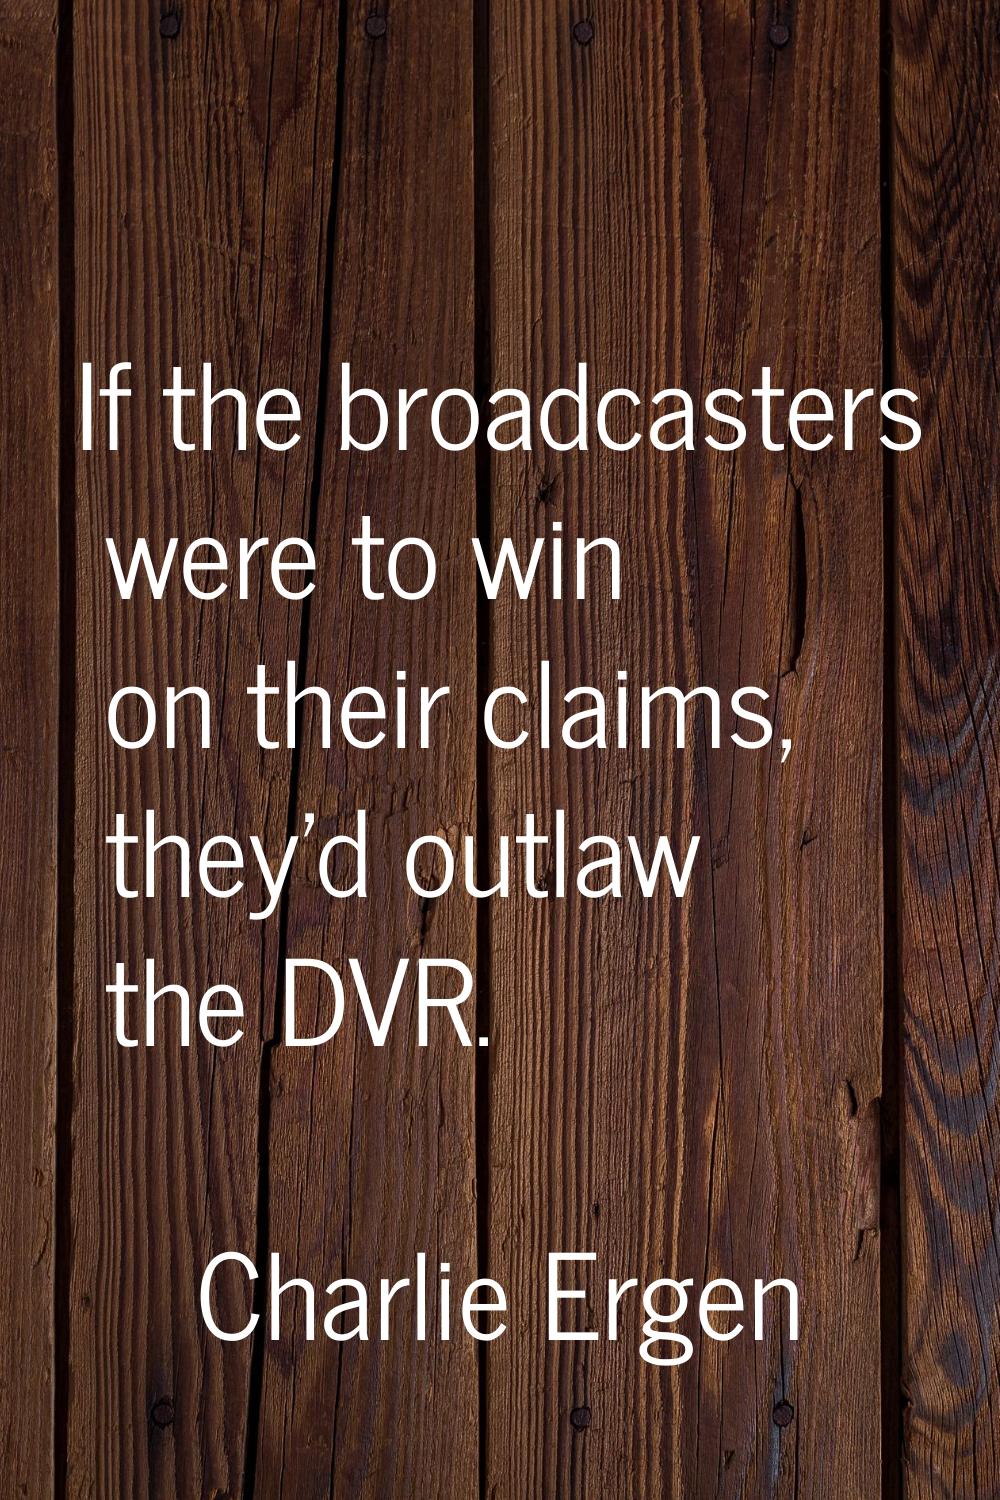 If the broadcasters were to win on their claims, they'd outlaw the DVR.